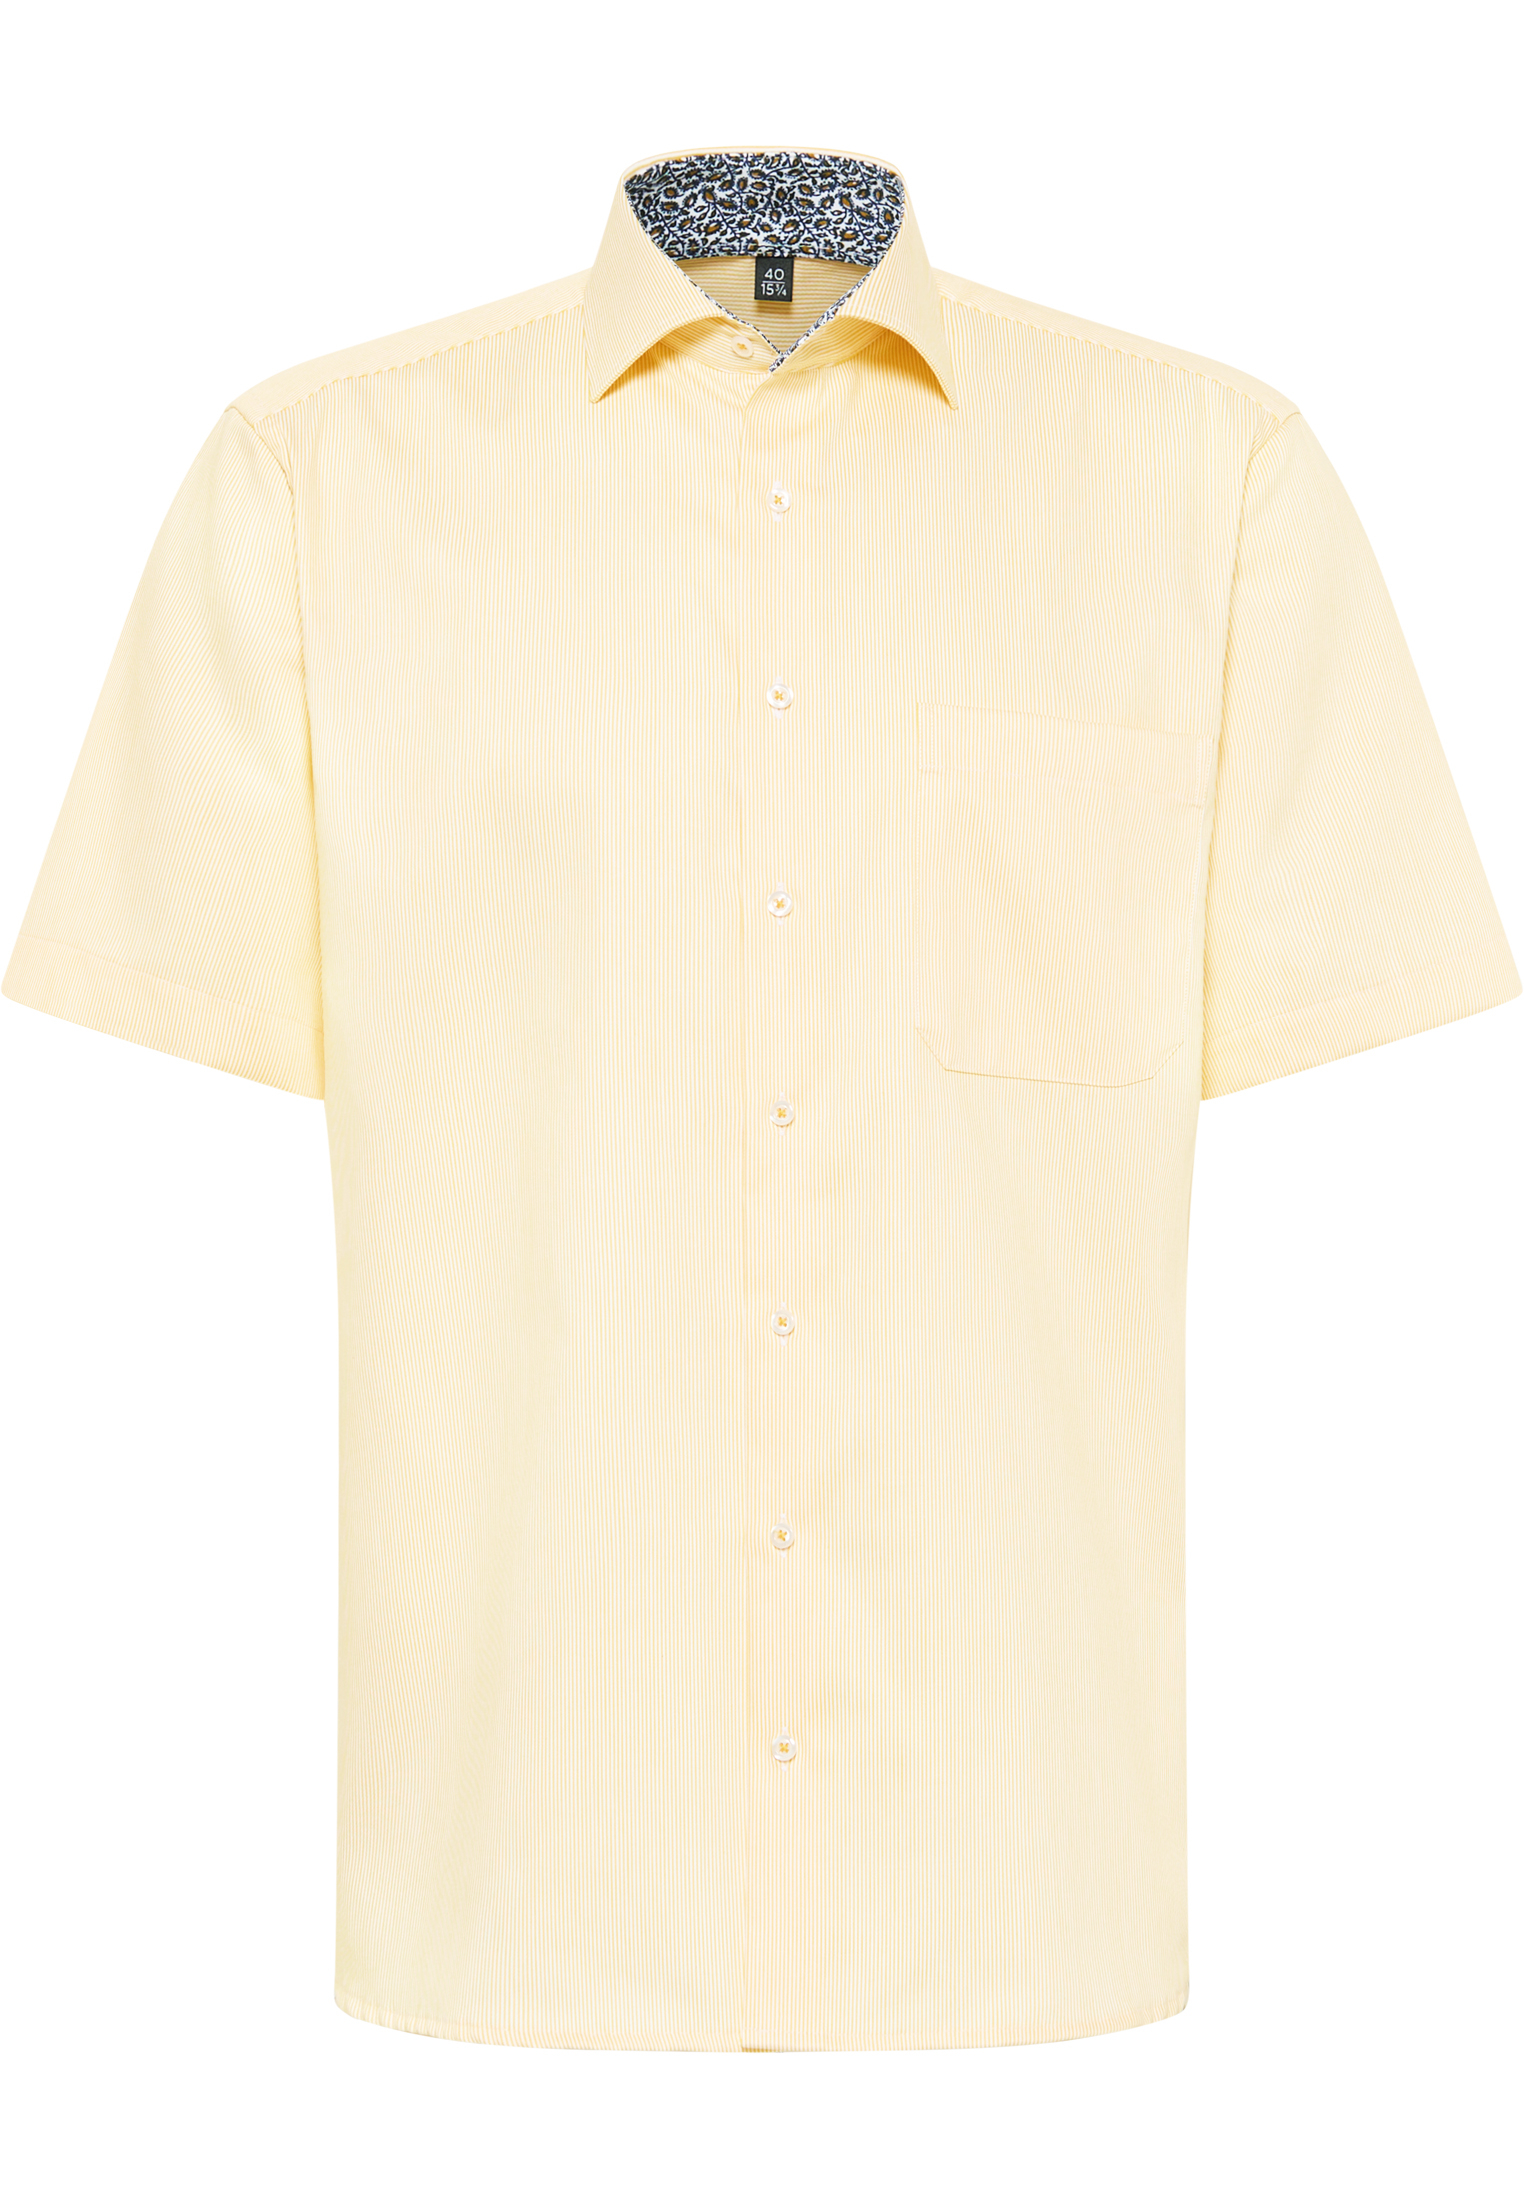 COMFORT FIT Shirt in yellow striped